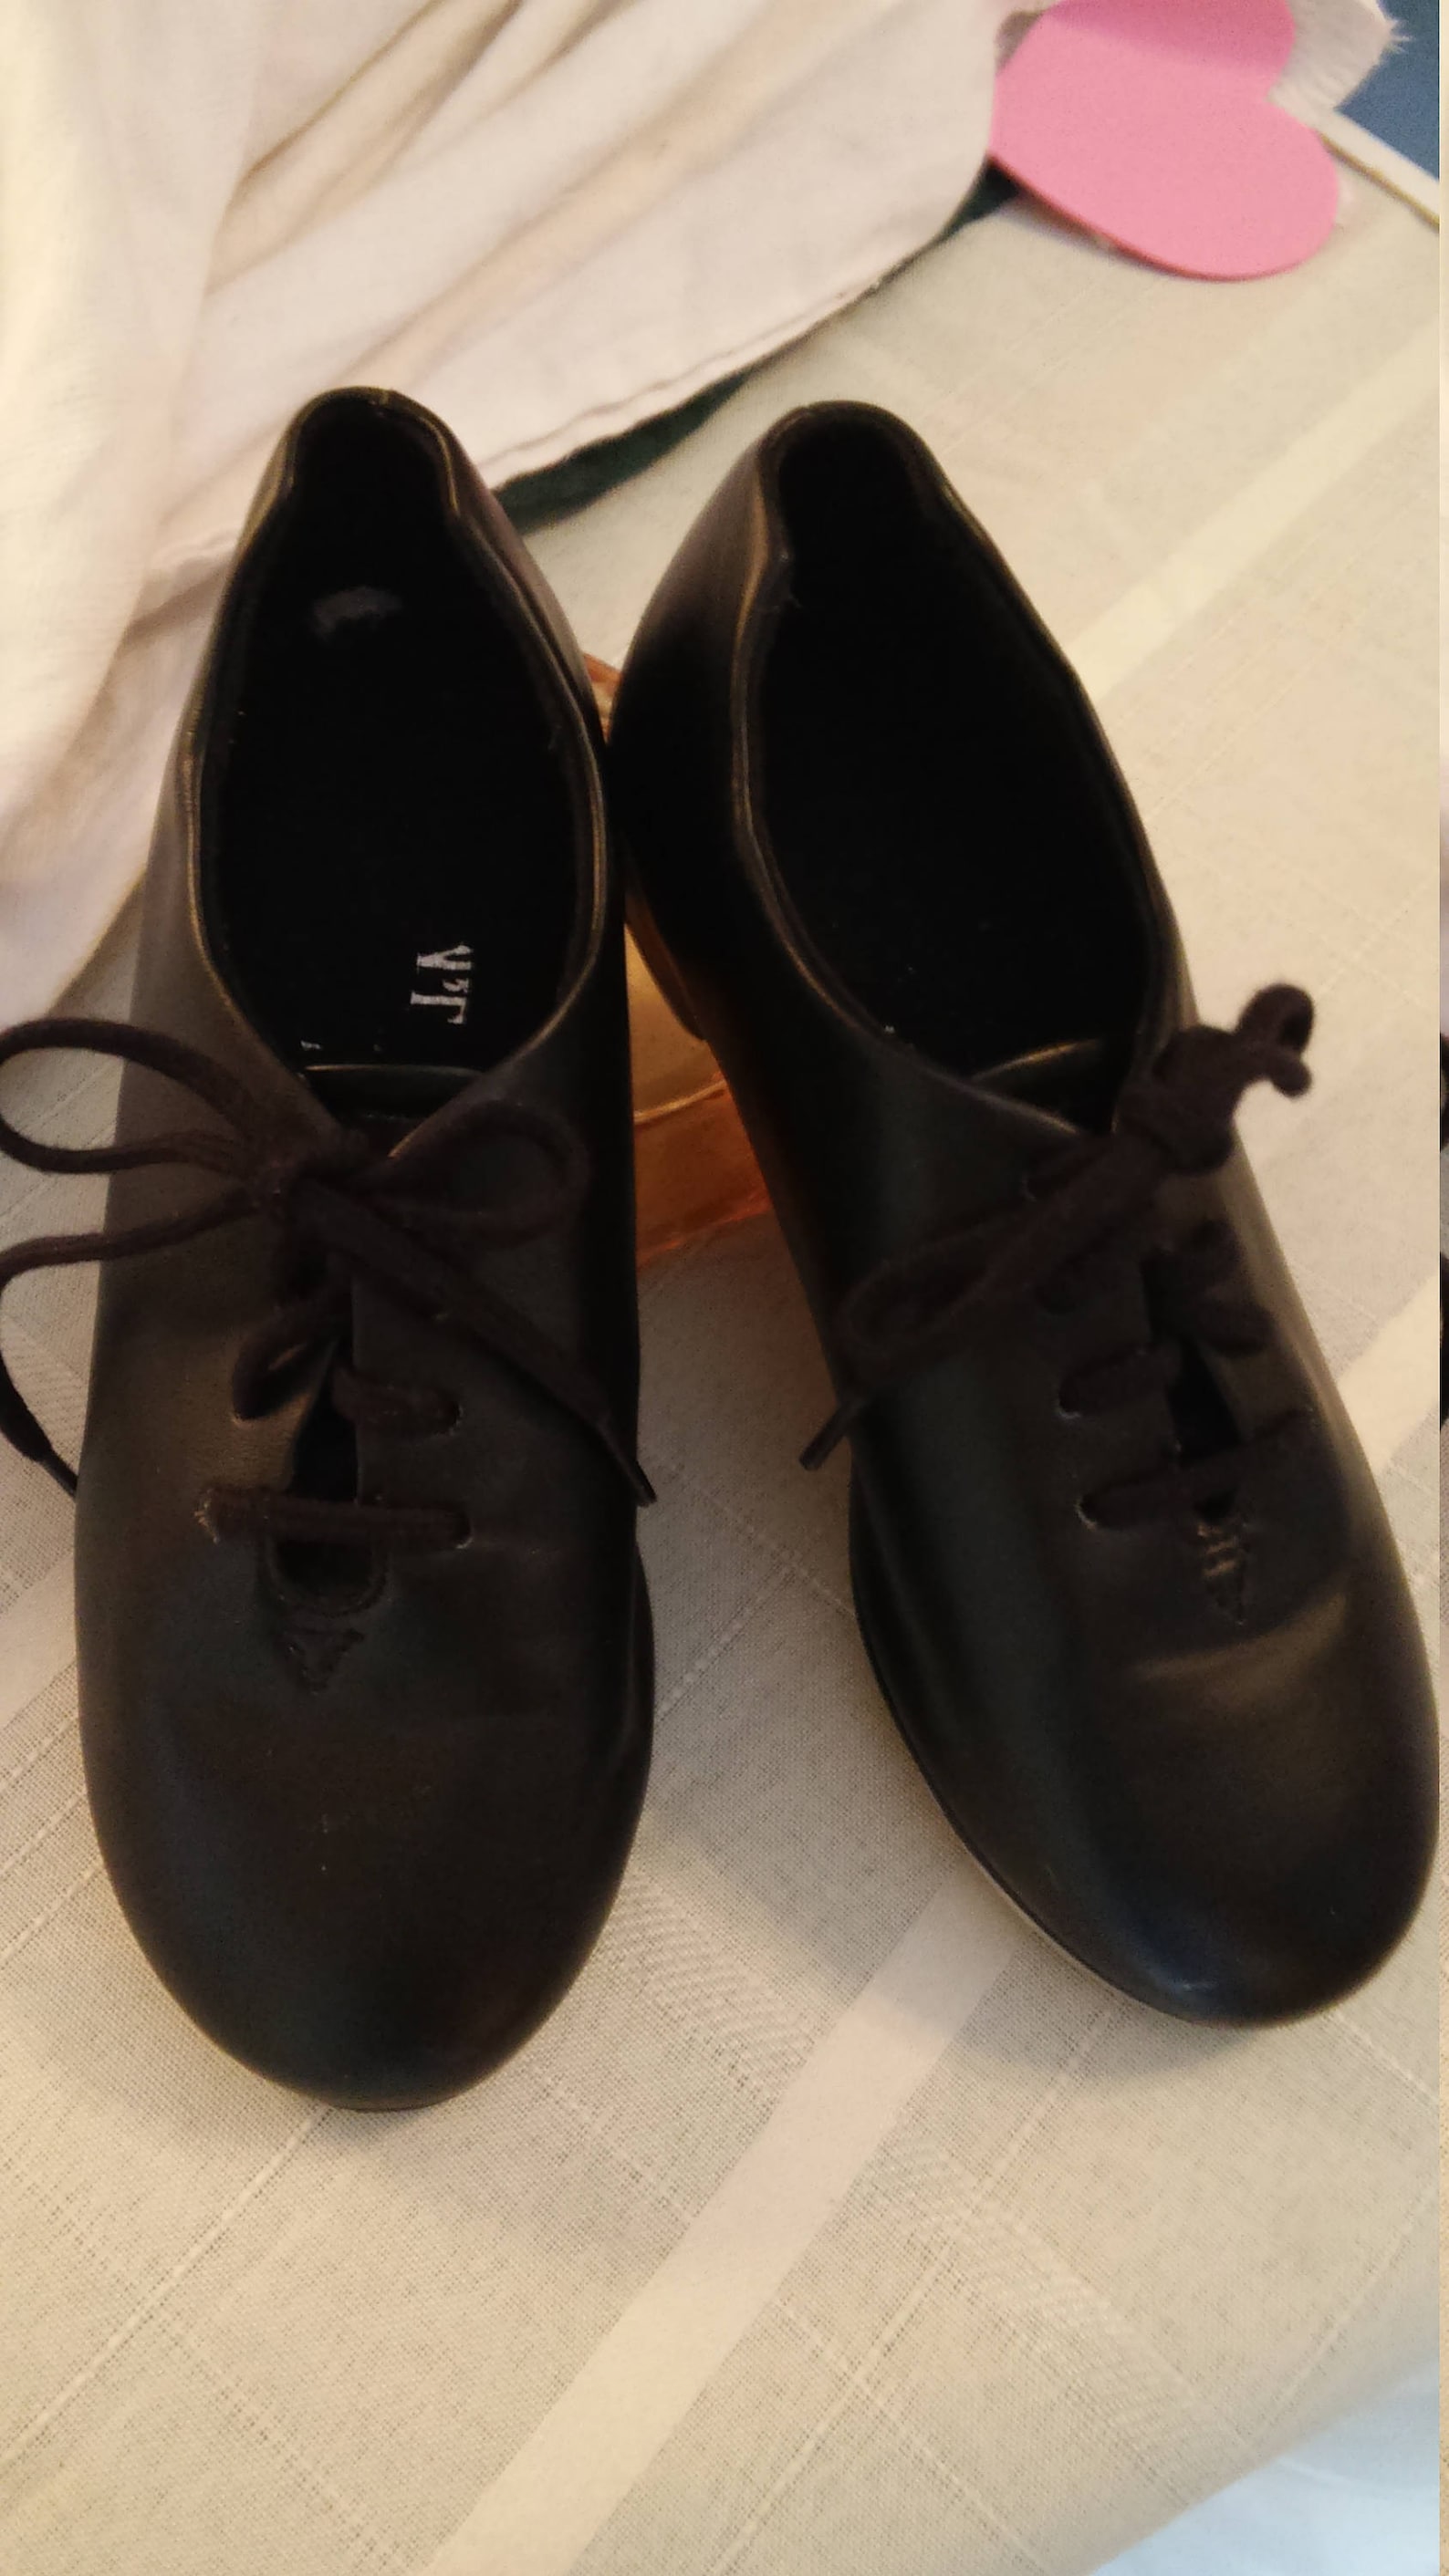 reduced - american ballet theater tap shoes - spotlights - black - girls